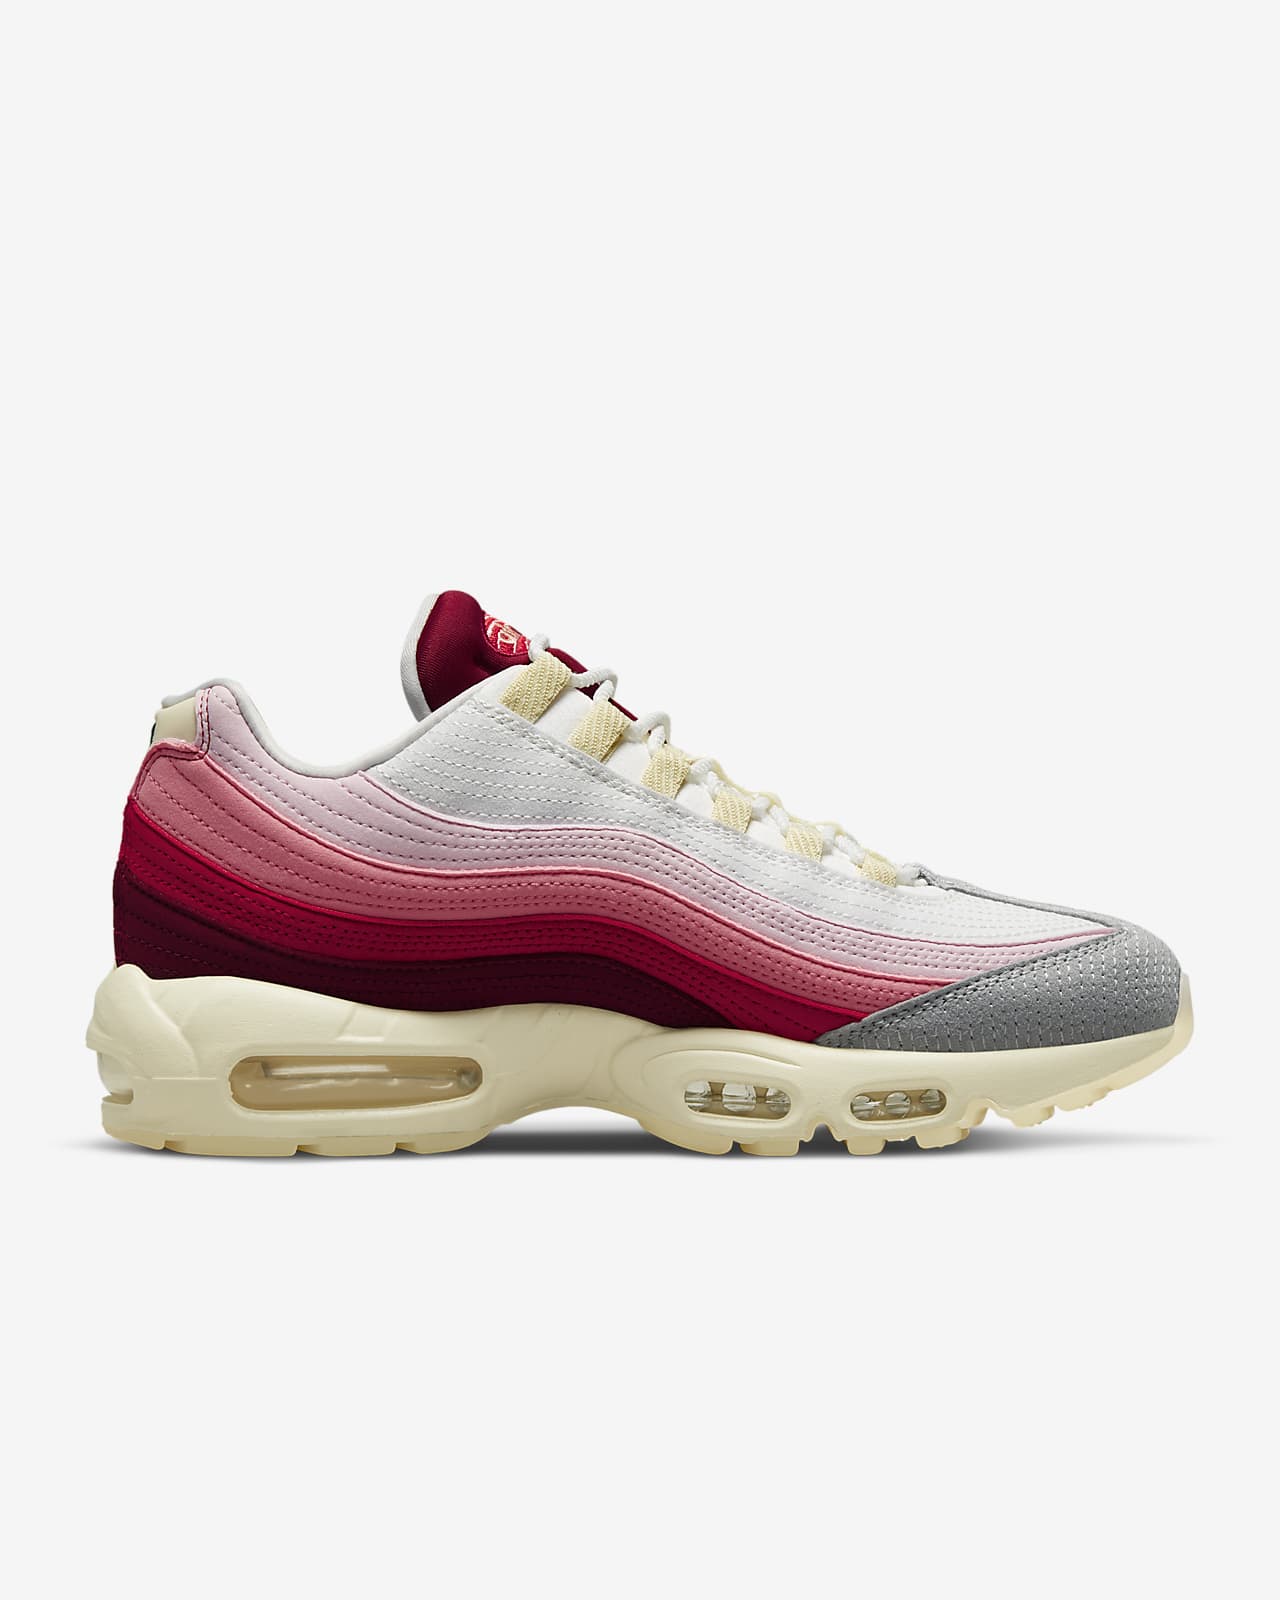 size 13 men's nike air max 95 shoes